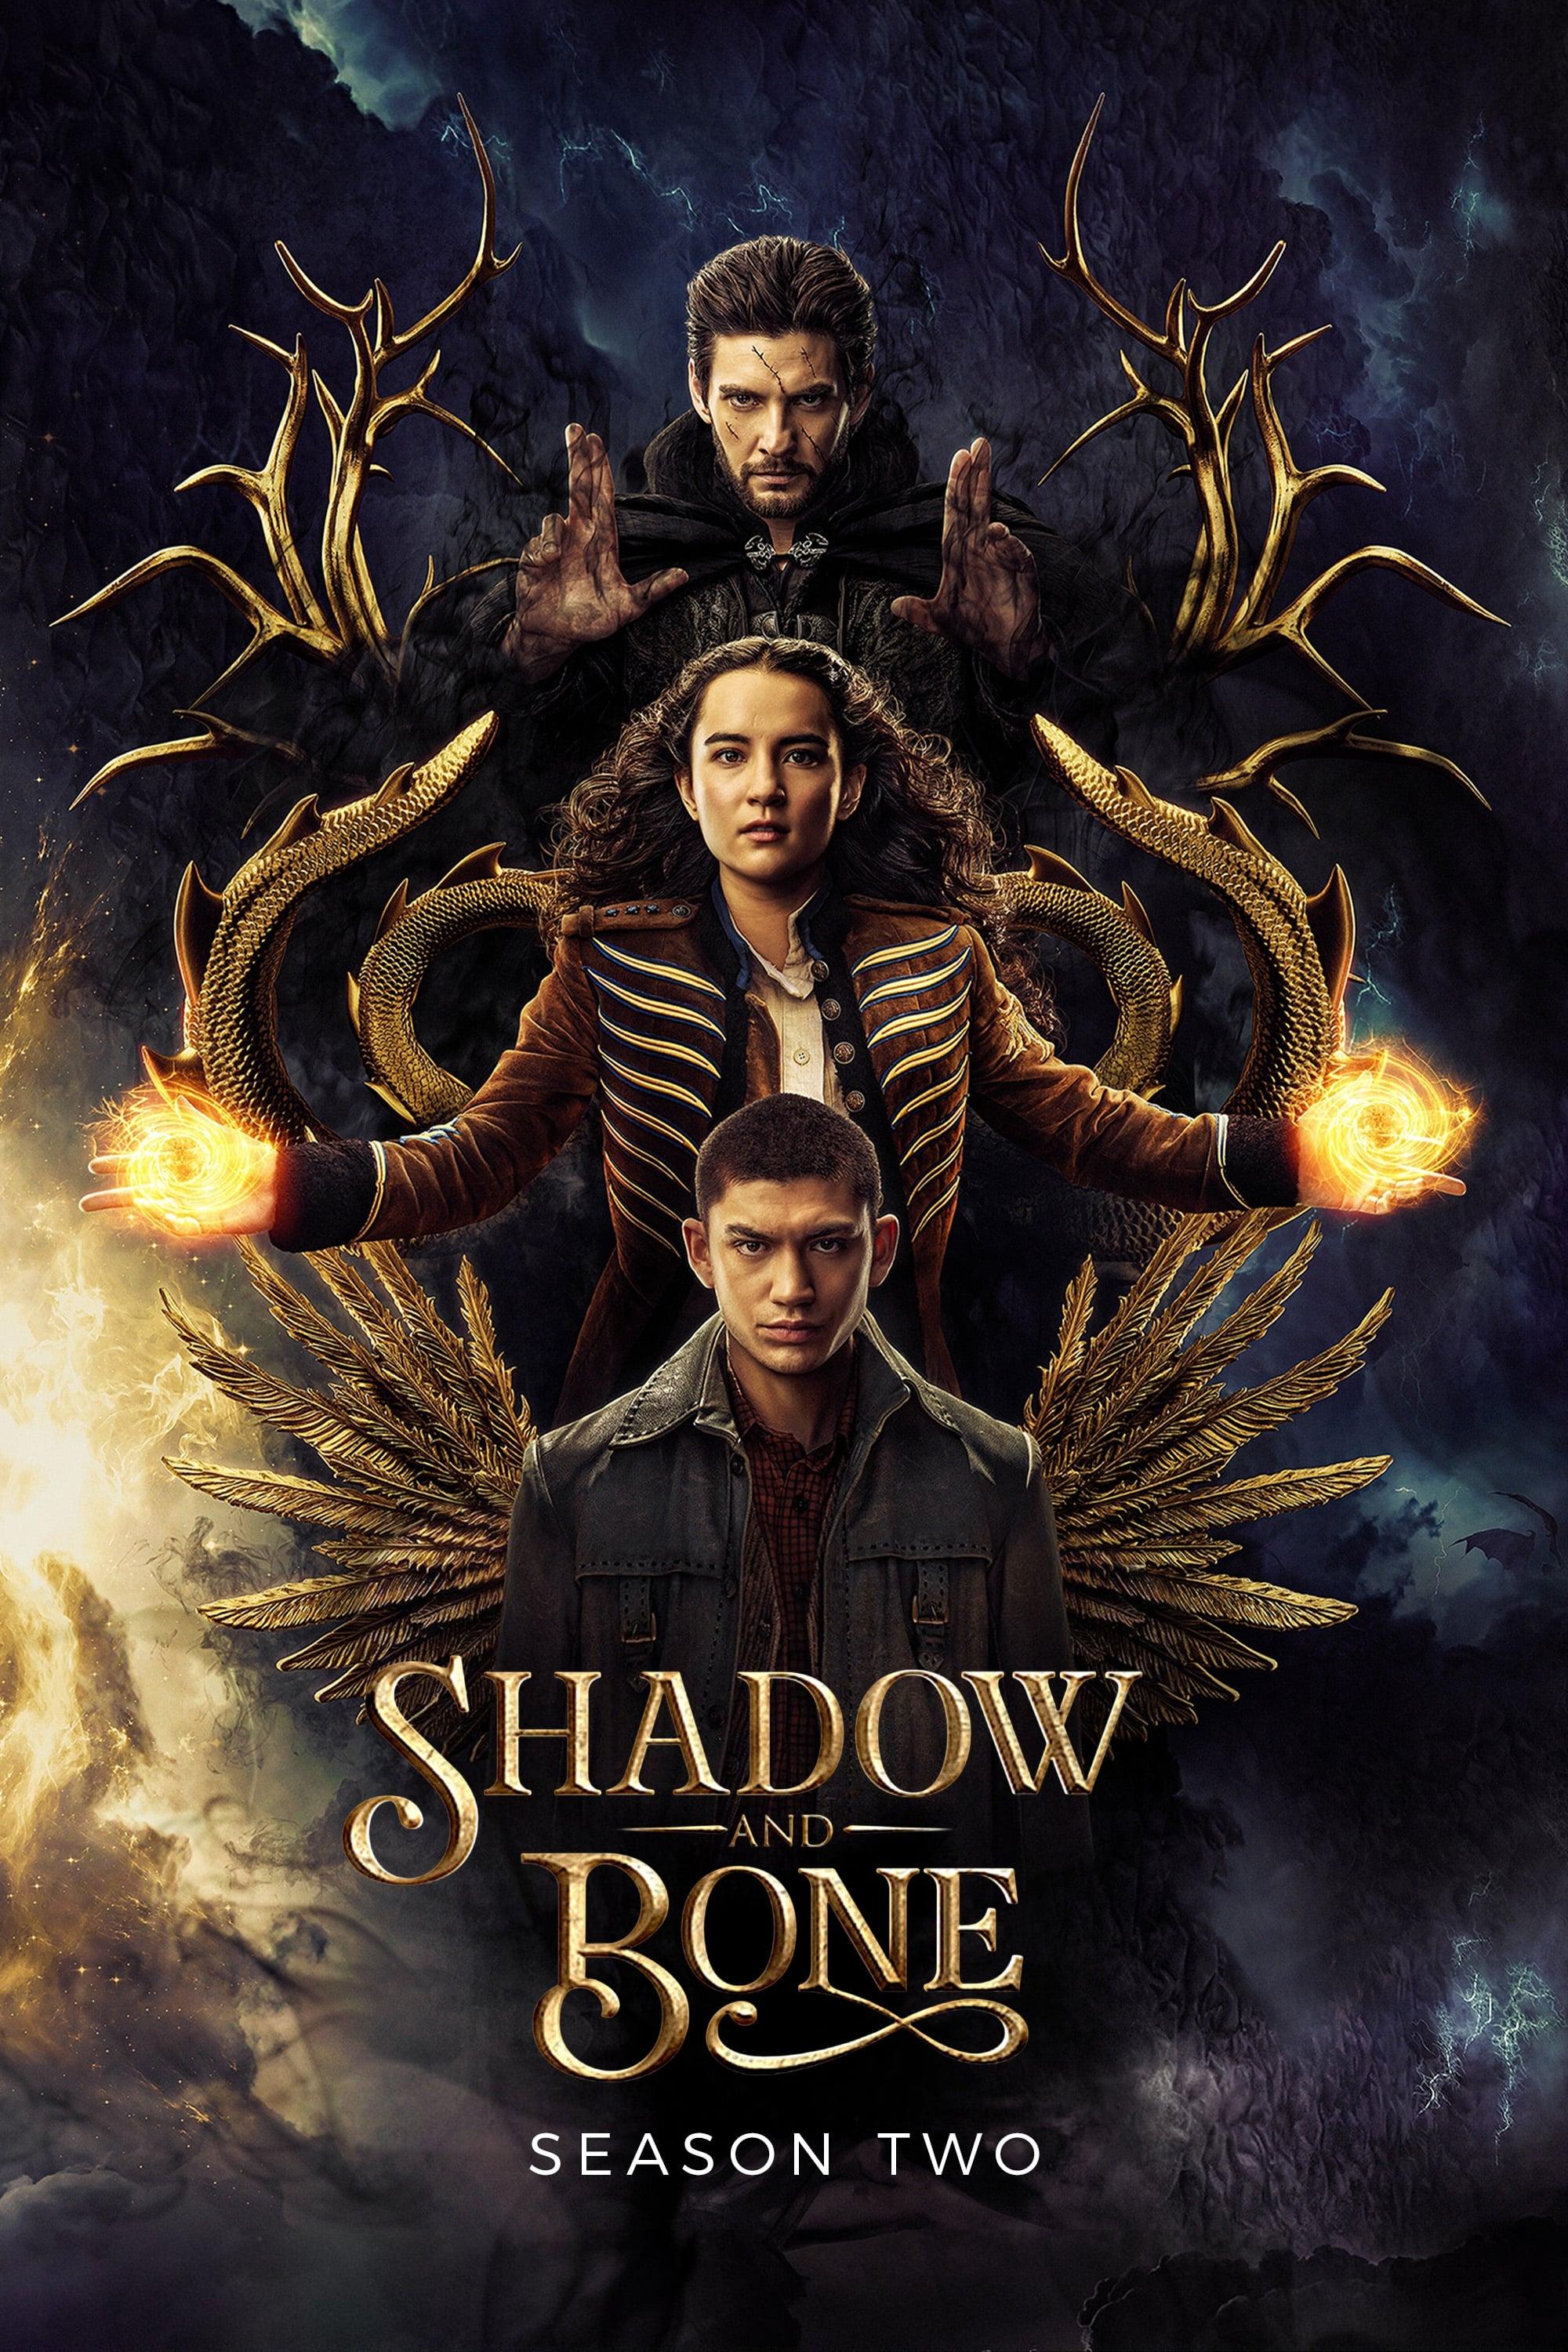 Shadow and Bone - The Afterparty poster